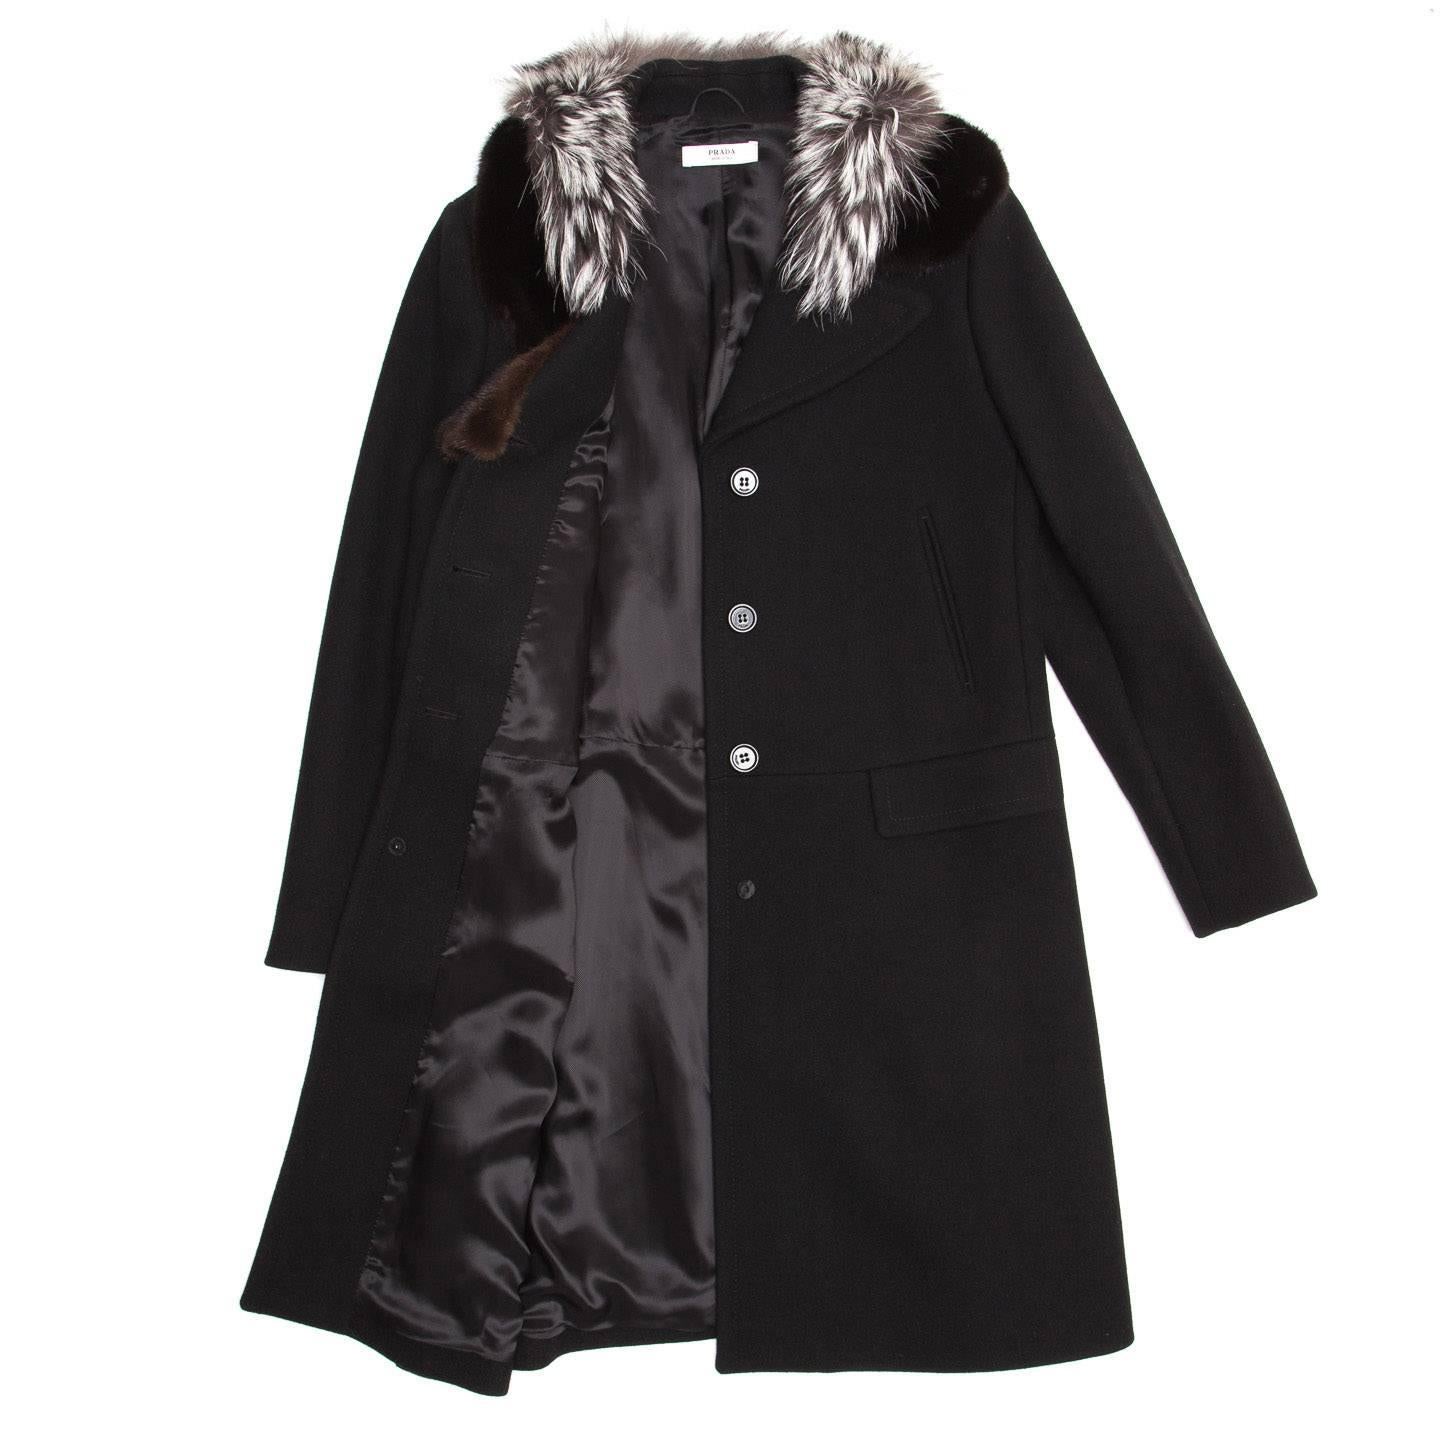 Prada Black Wool & Fur Collar Coat In Excellent Condition For Sale In Brooklyn, NY